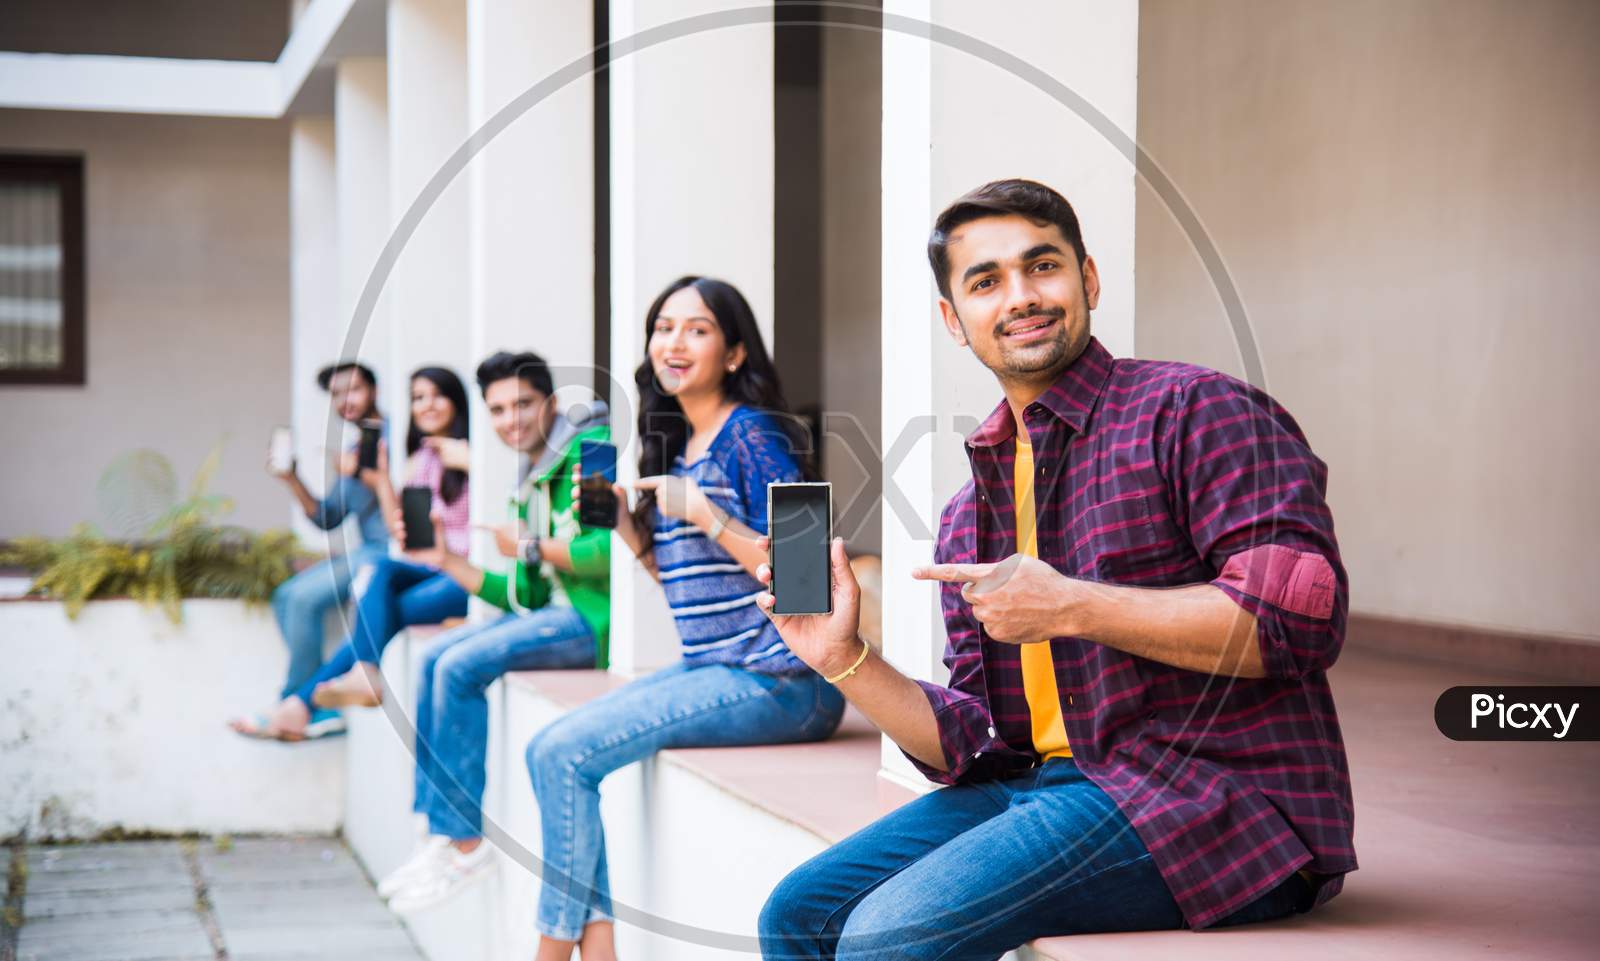 Indian Asian Group Of College Students Using Smartphones For Social Media, Texting, Watching Videos